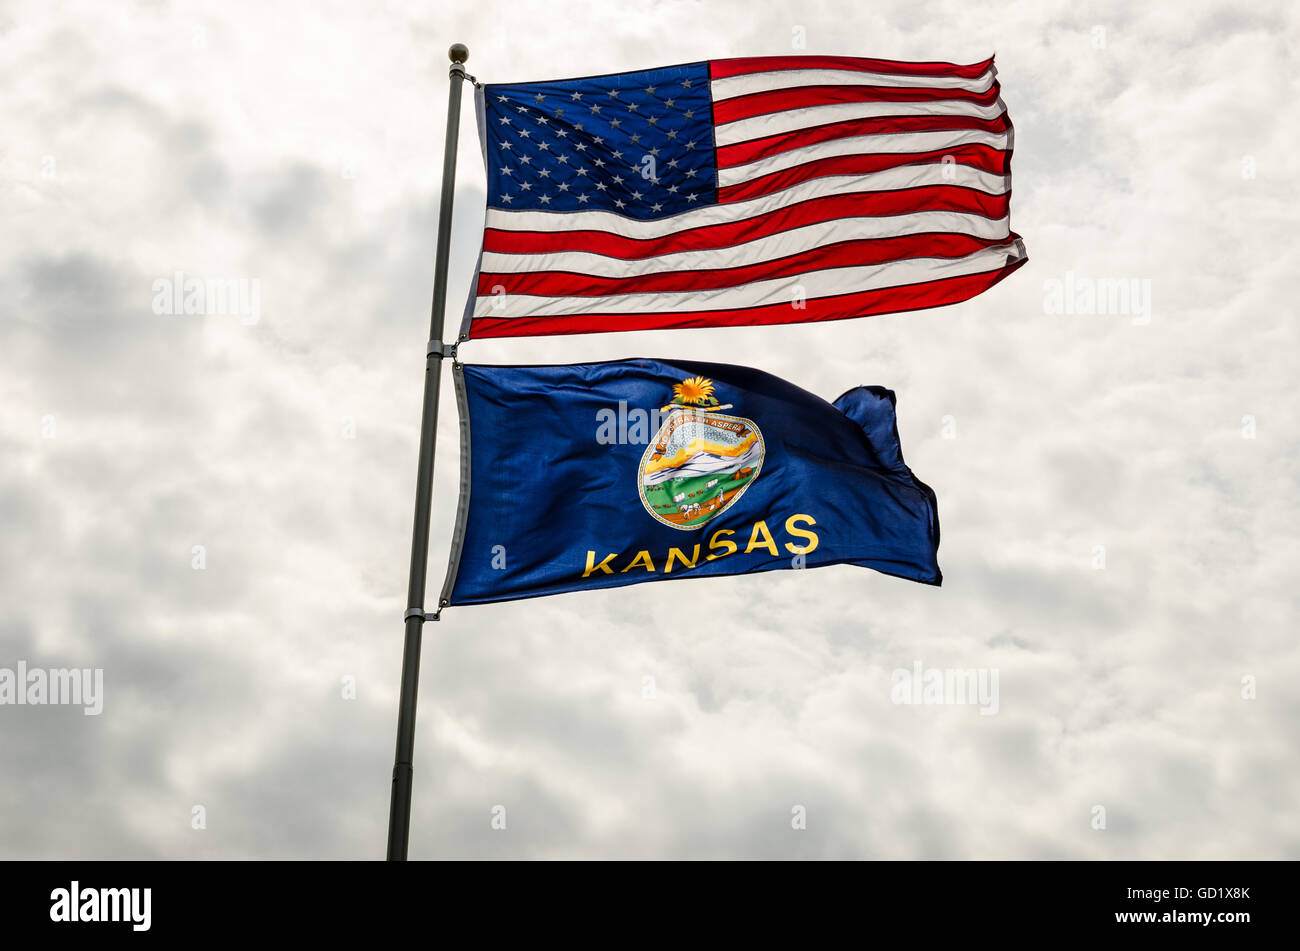 United States and Kansas flags blowing in the wind against a cloudy sky Stock Photo